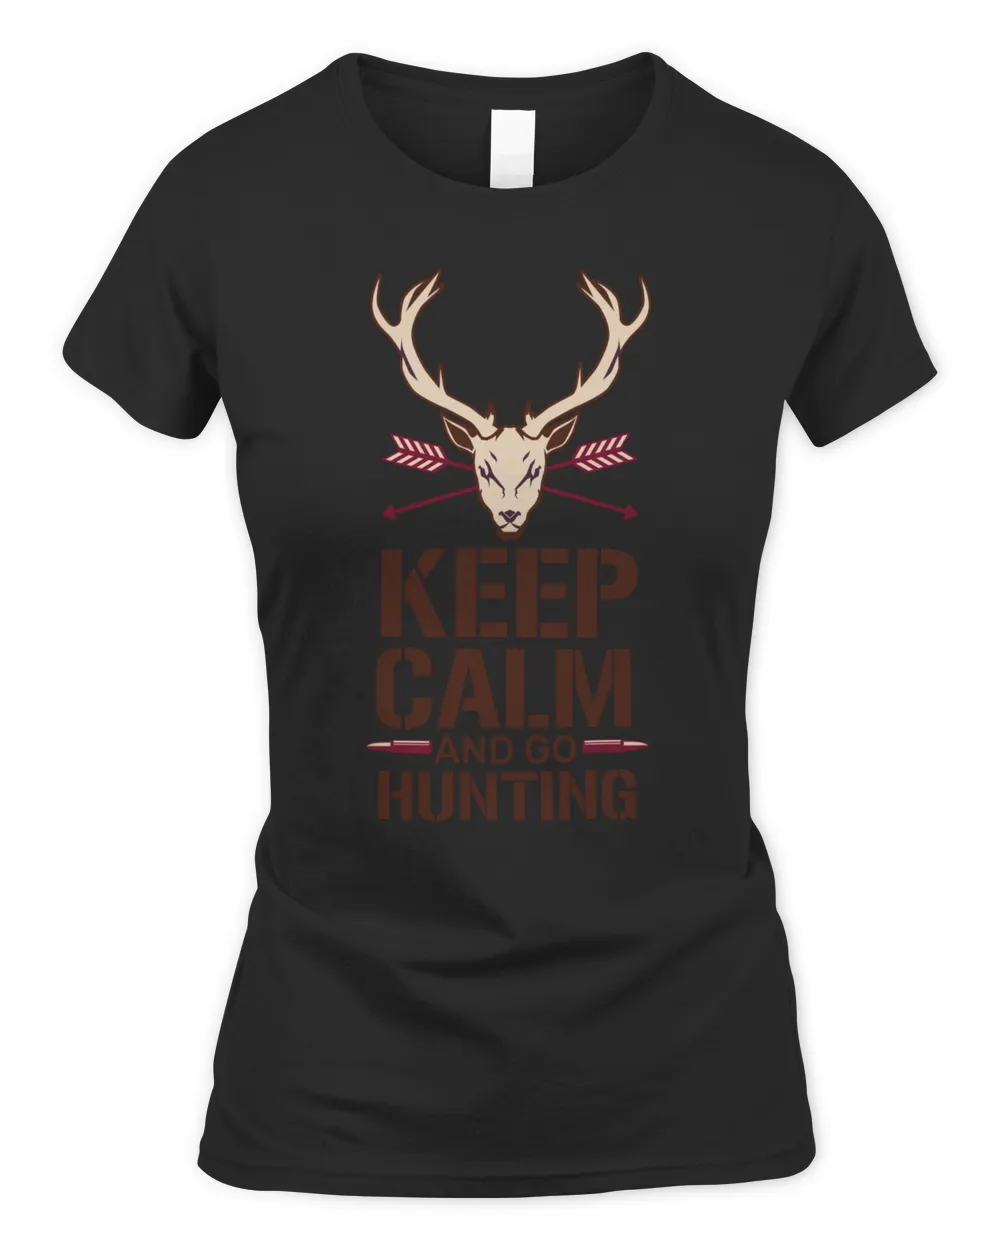 Keep Calm and Go Hunting